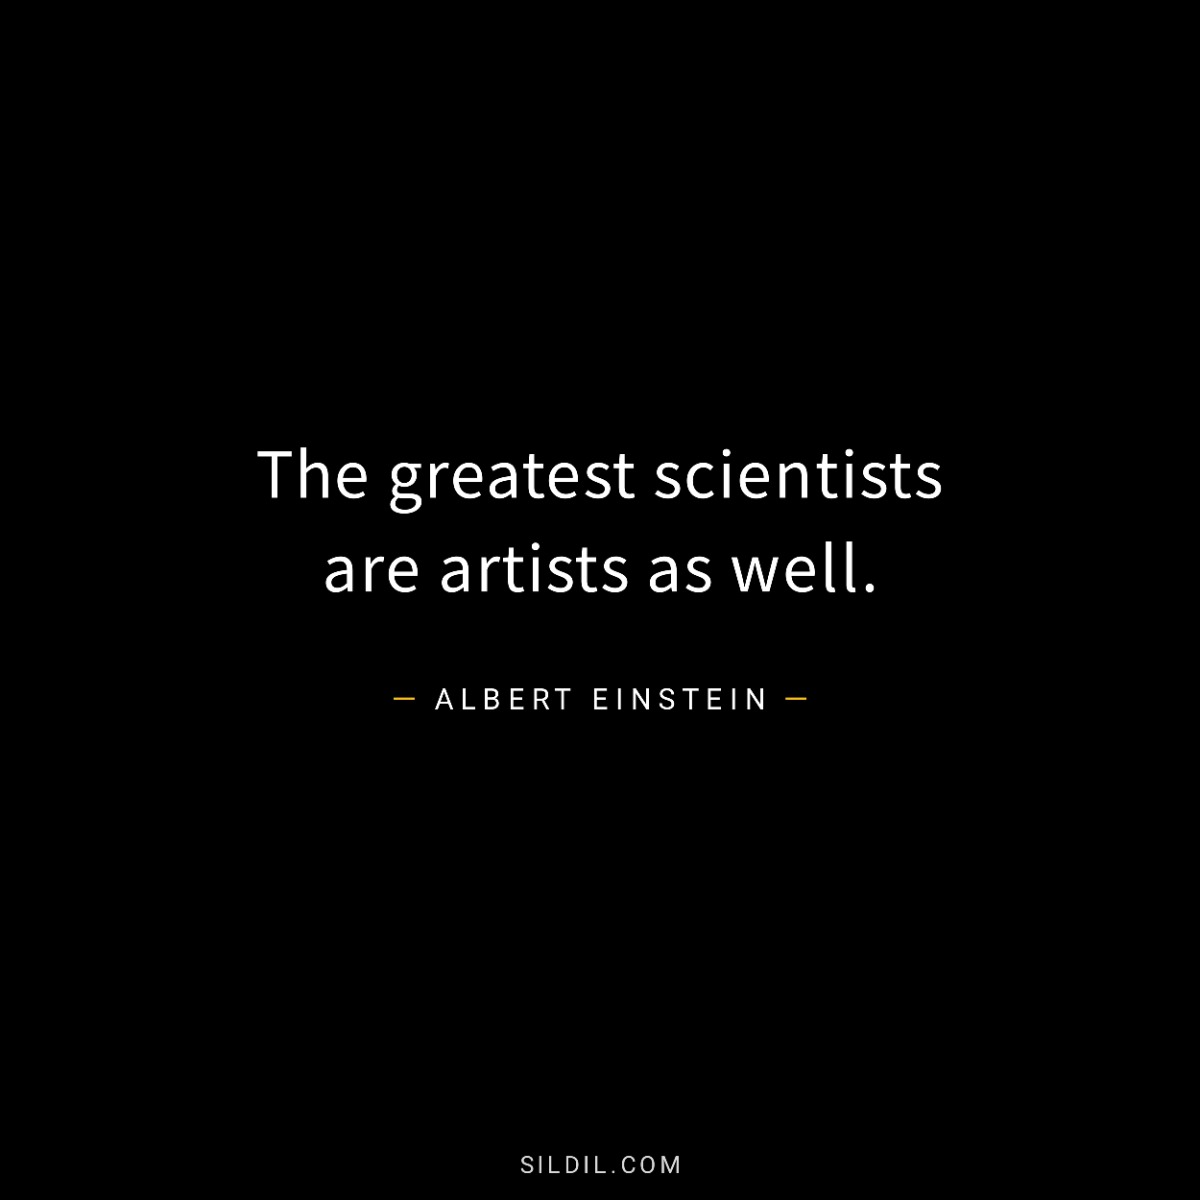 The greatest scientists are artists as well.